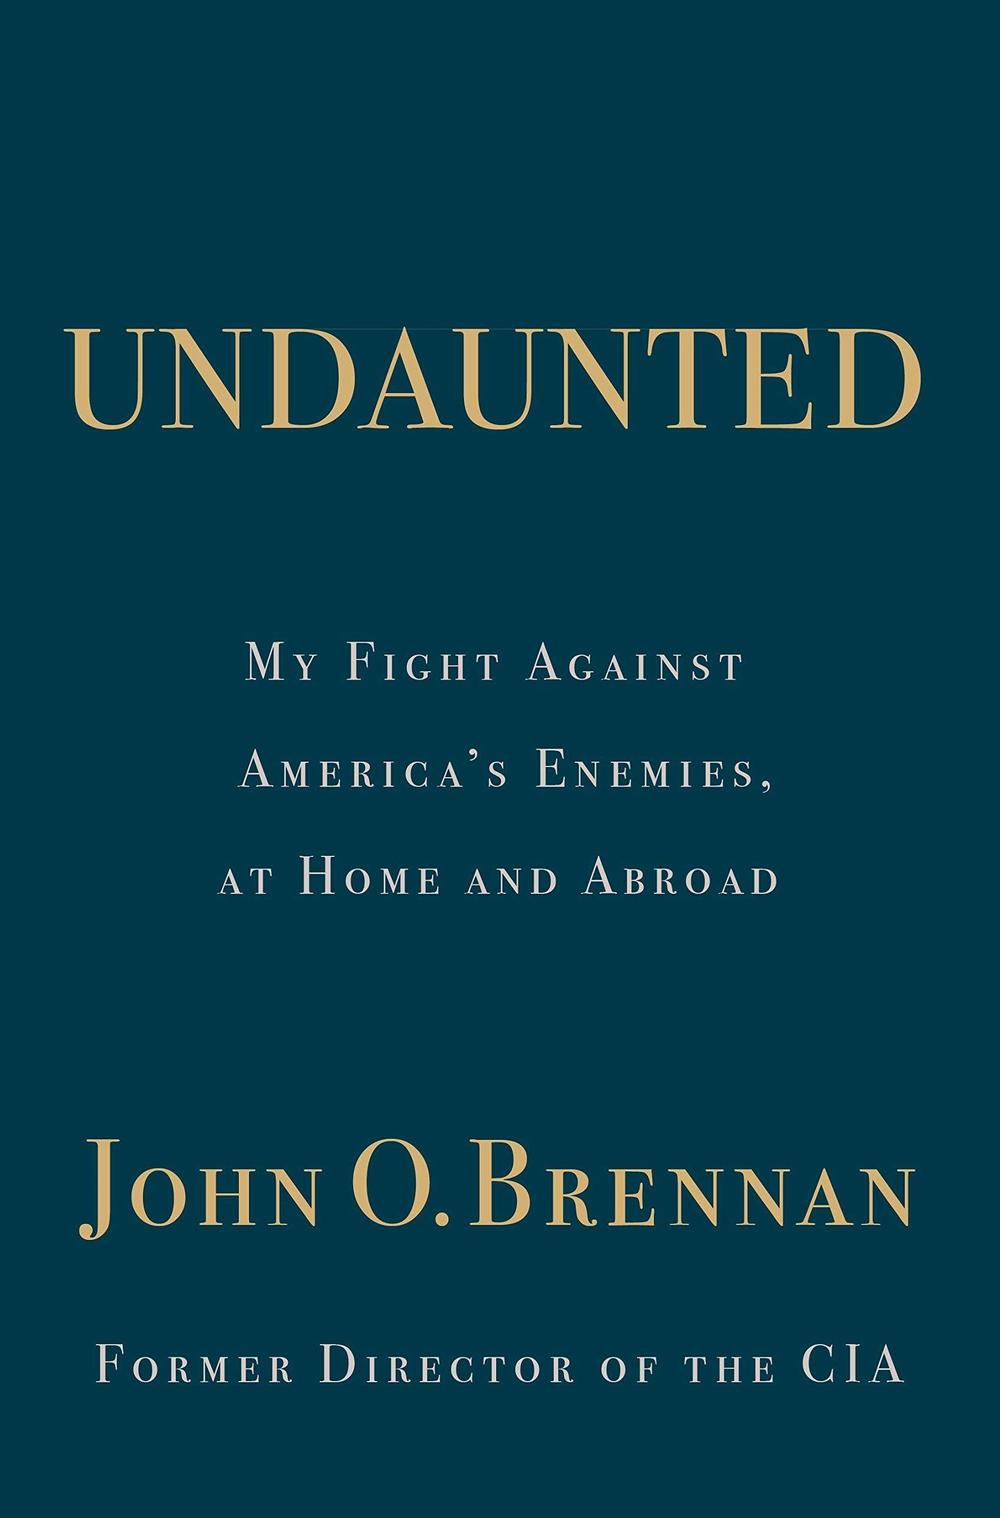 <em>Undaunted: My Fight Against America's Enemies, At Home and Abroad,</em> John O. Brennan